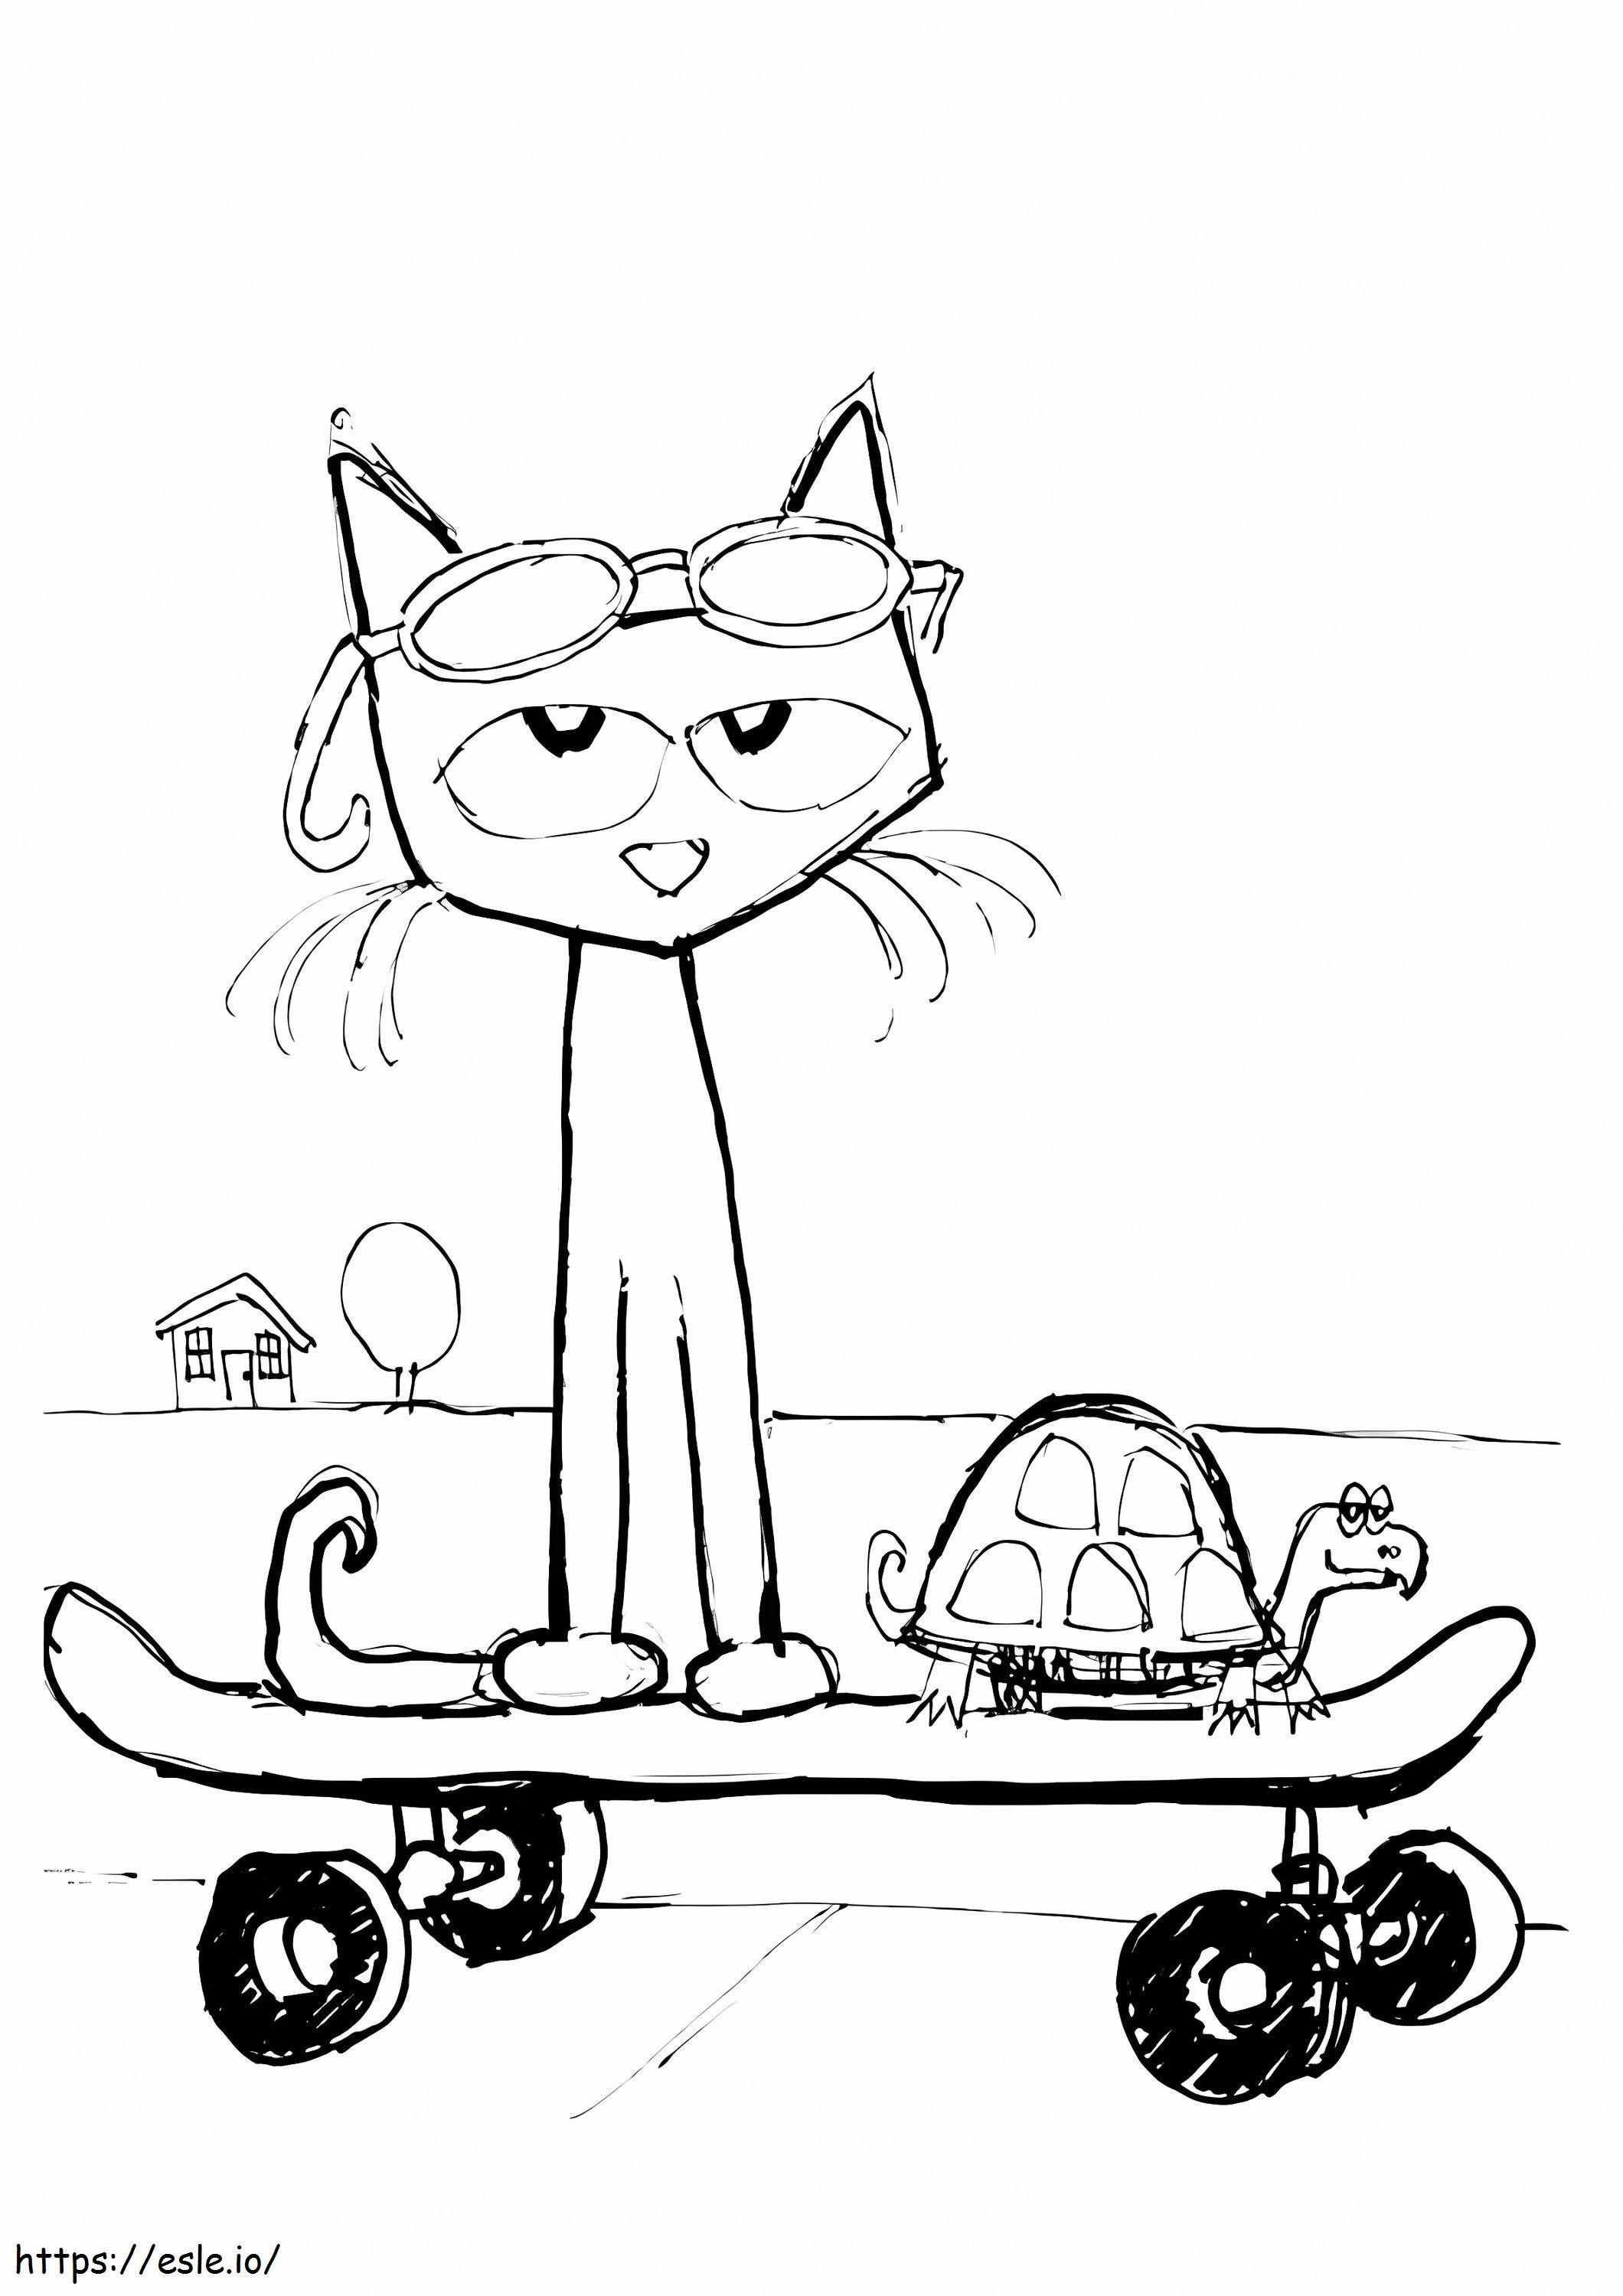 Pete The Cat And Turtle coloring page